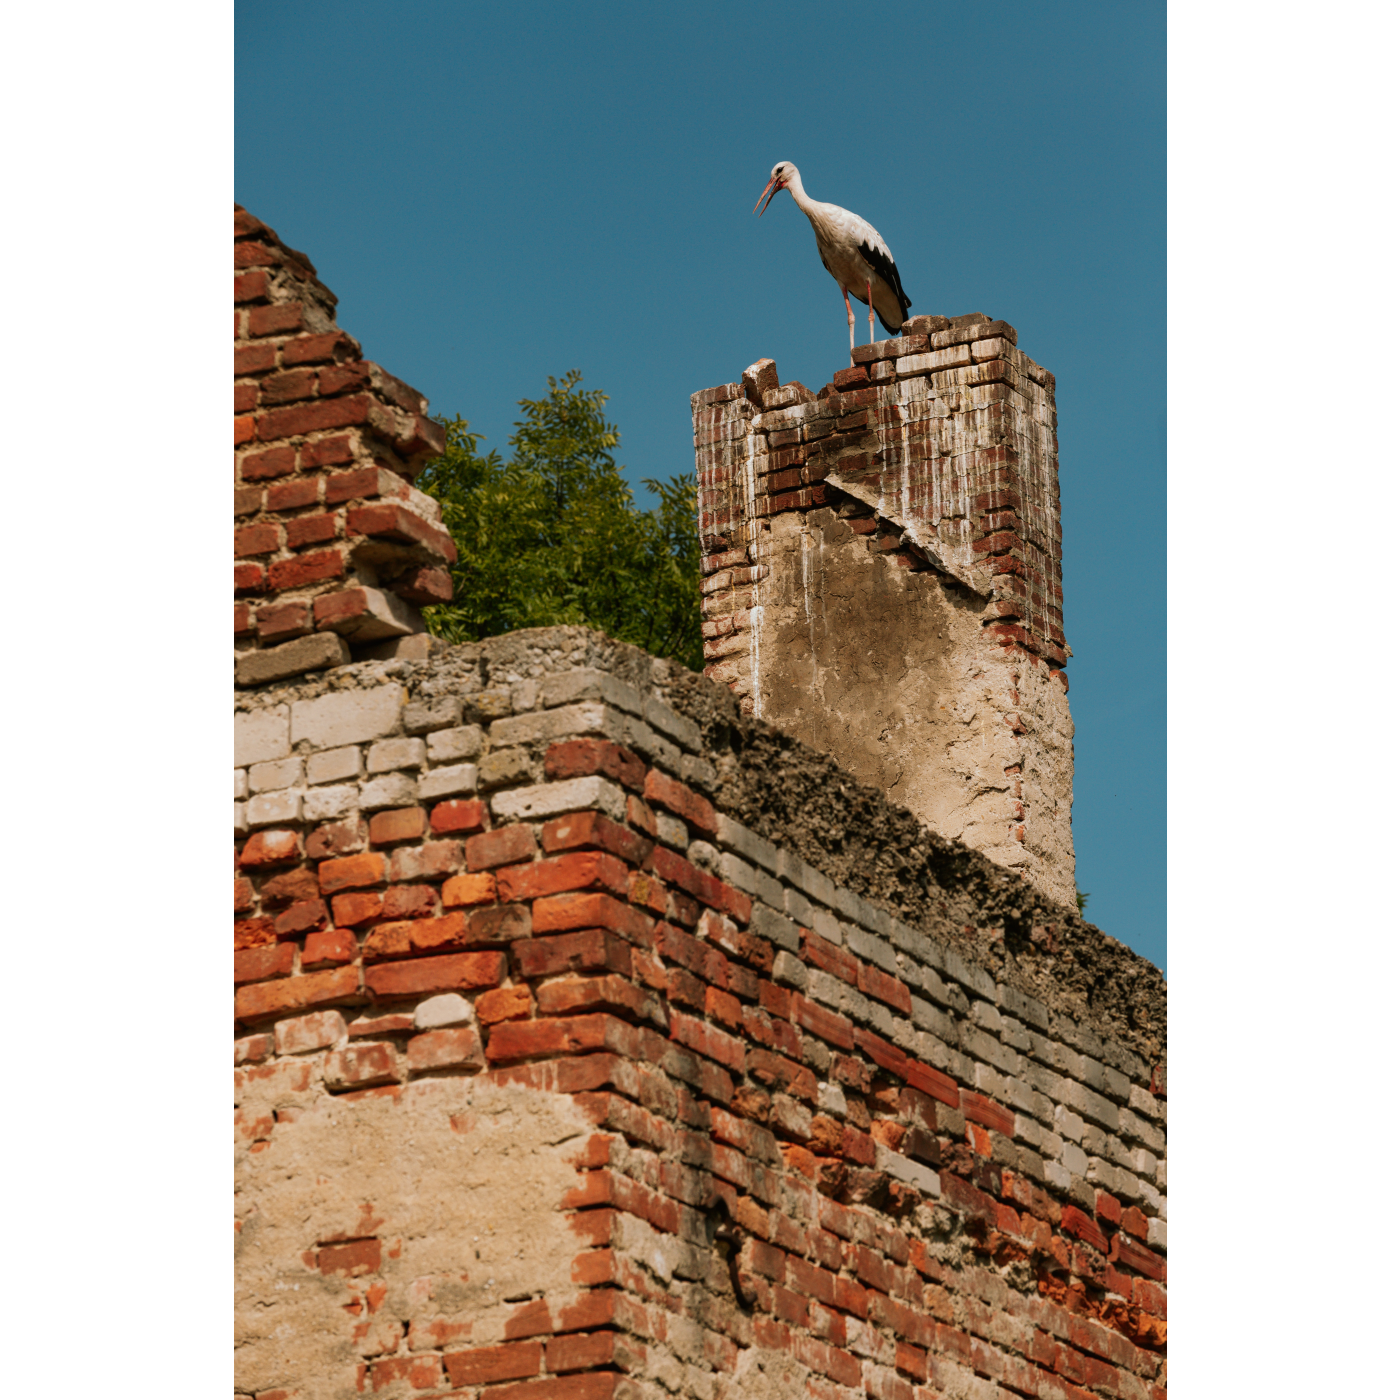 A winged guest on the castle tower